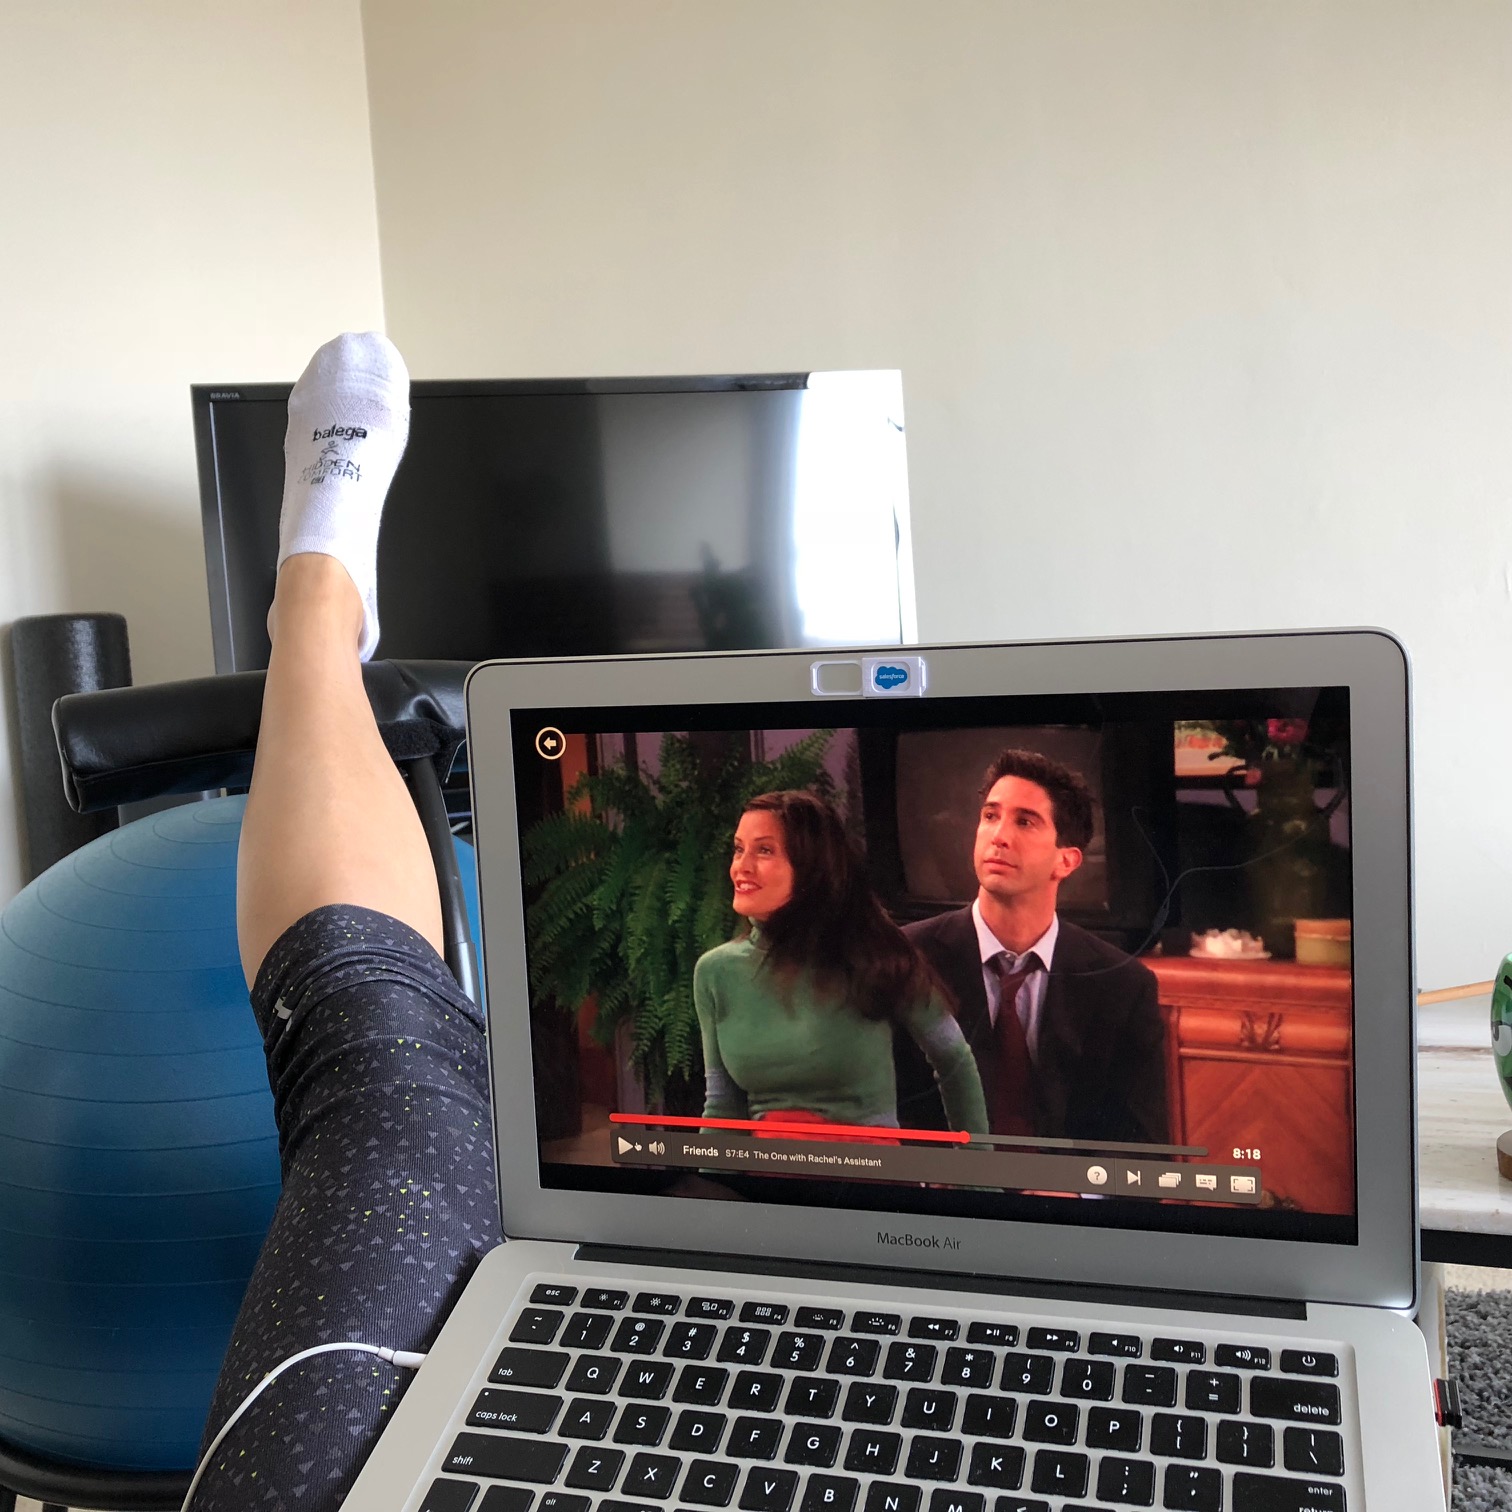 elevating my left leg while watching Friends